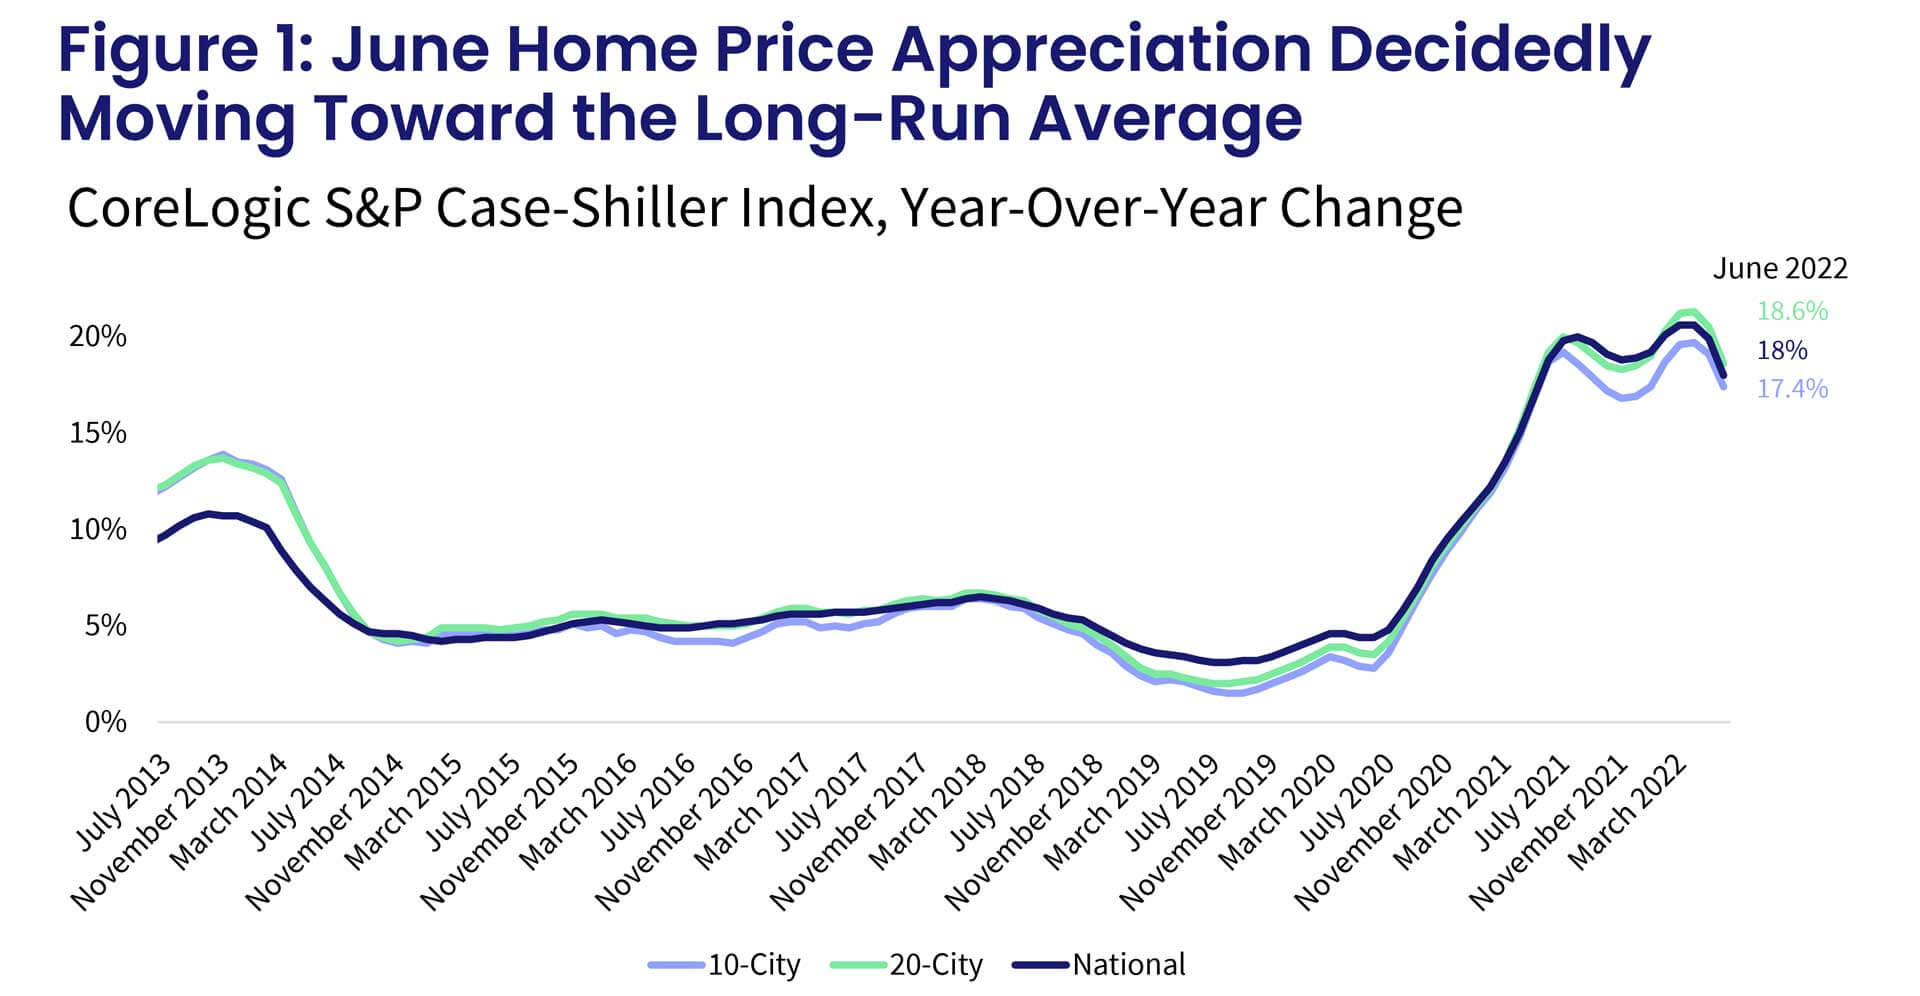 Figure 1: June Home Price Appreciation Decidedly Moving Toward the Long-Run Average 